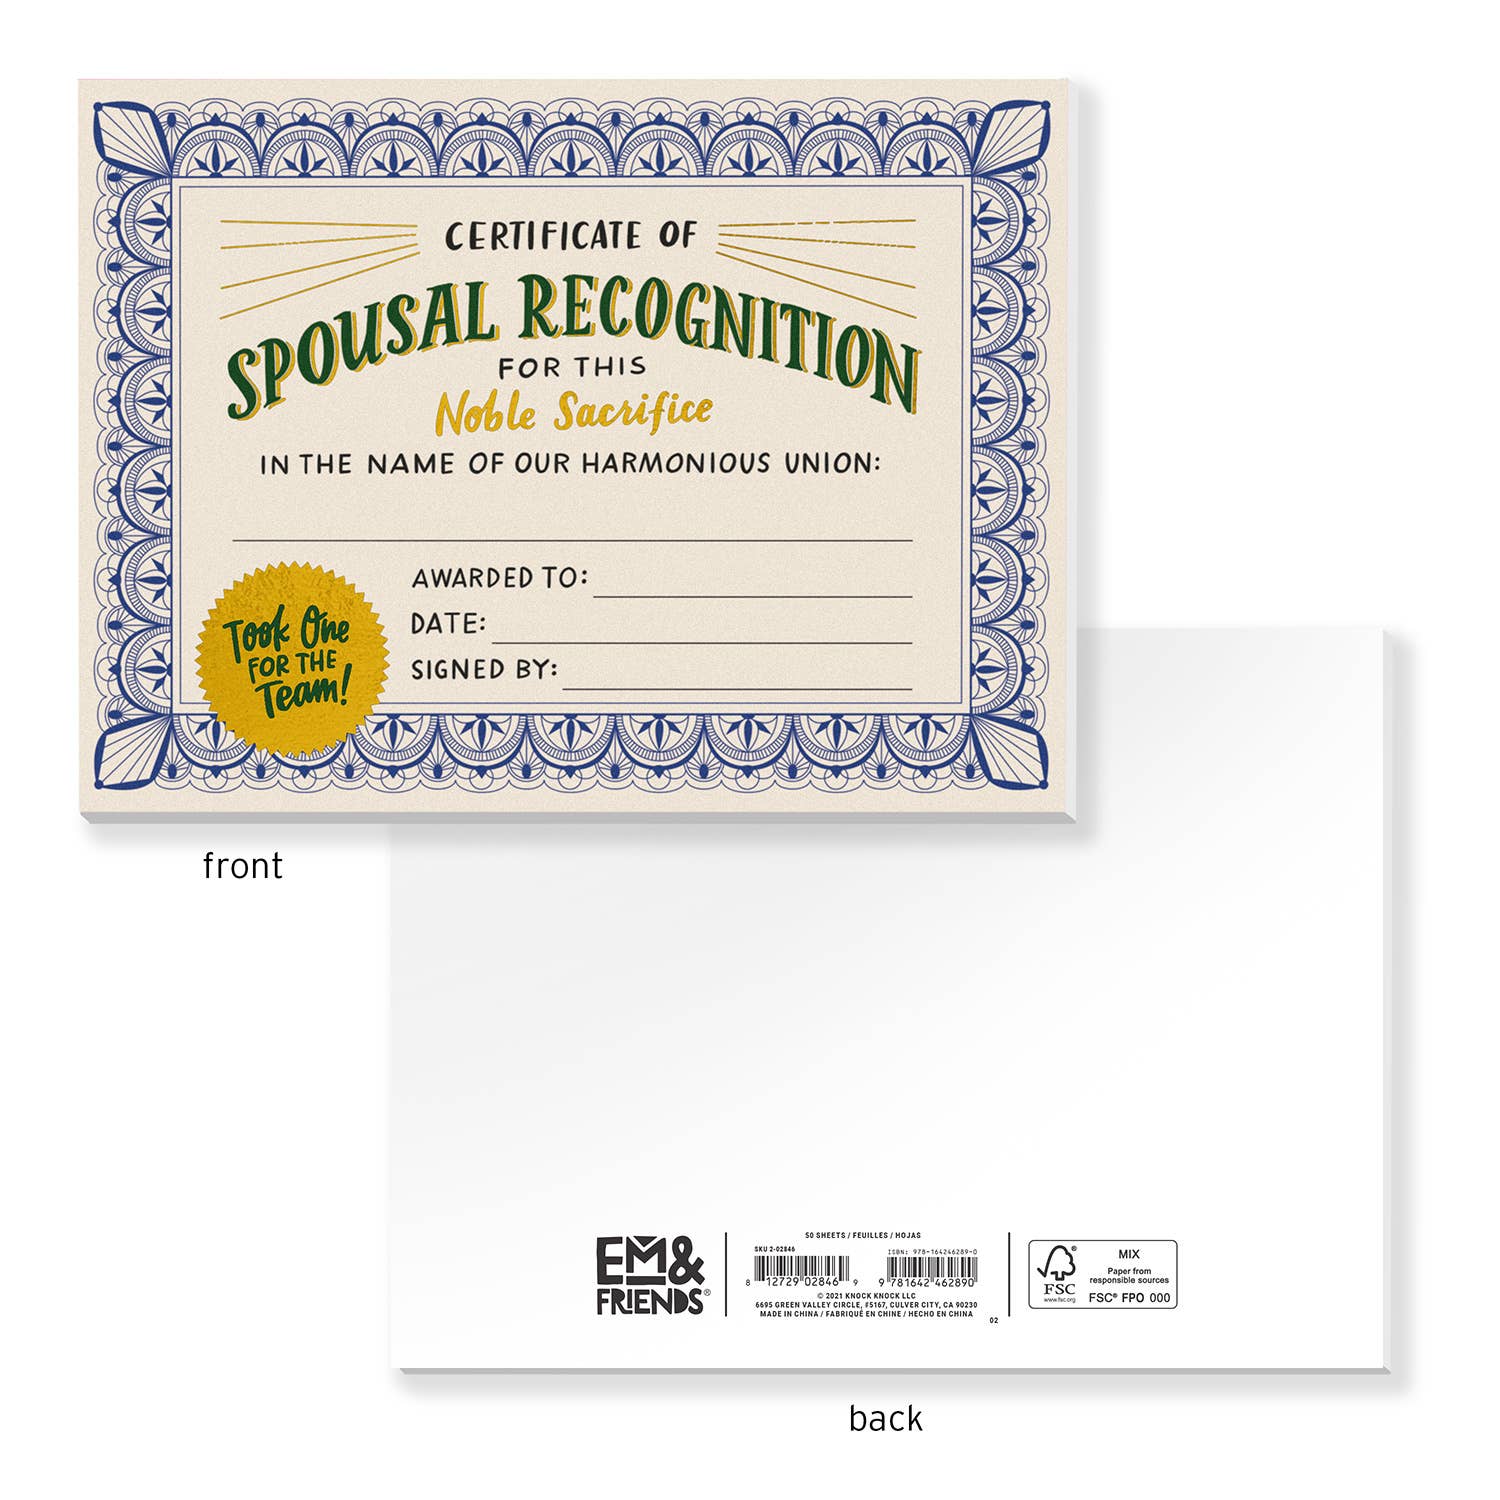 Spousal Recognition Certificate Notepad (Refresh) - Origin Maternity 